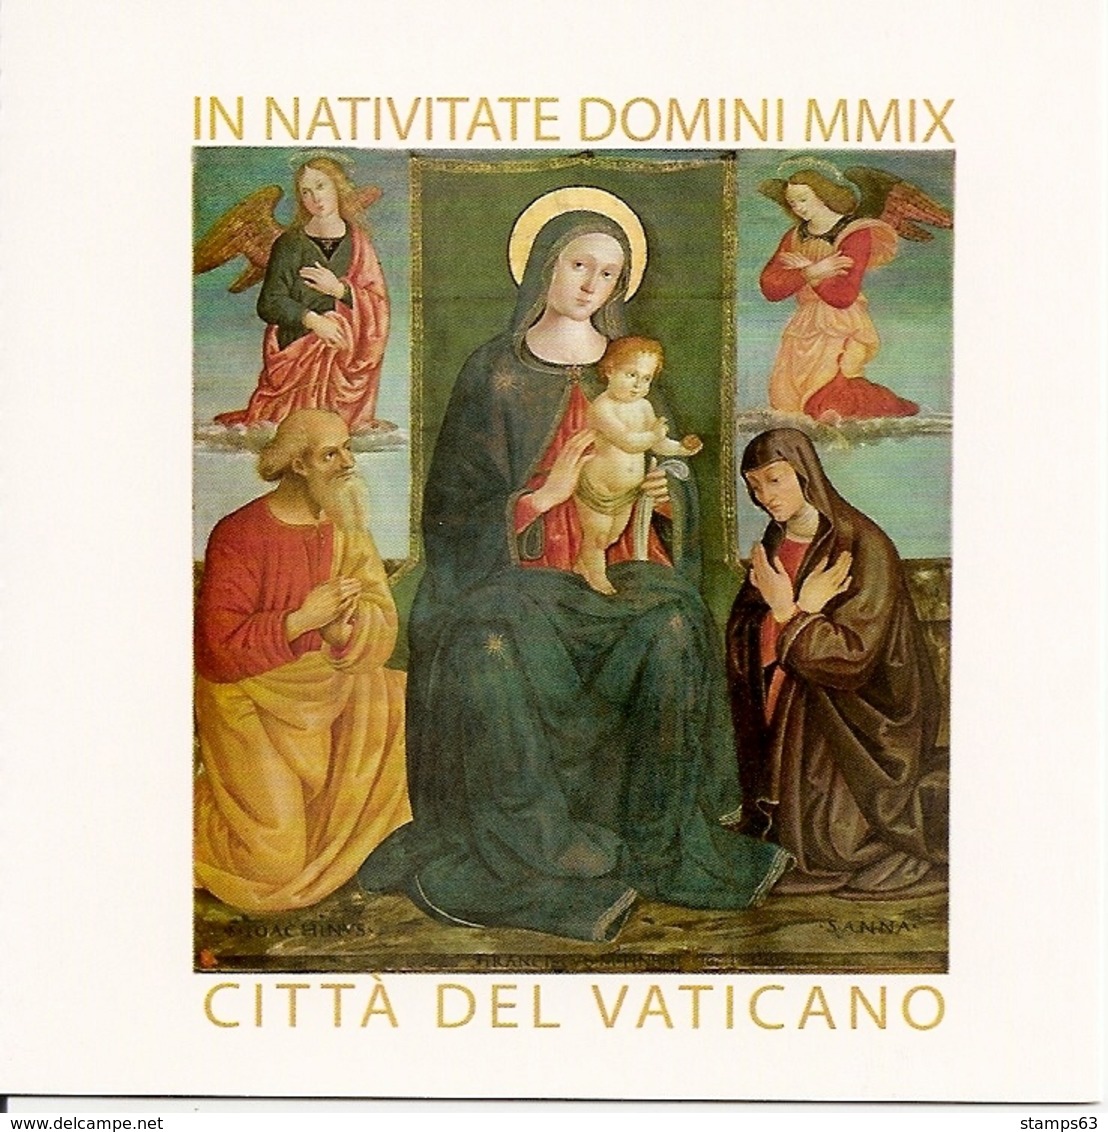 VATICAN CITY, 2009, Booklet 17, Christmas - Booklets